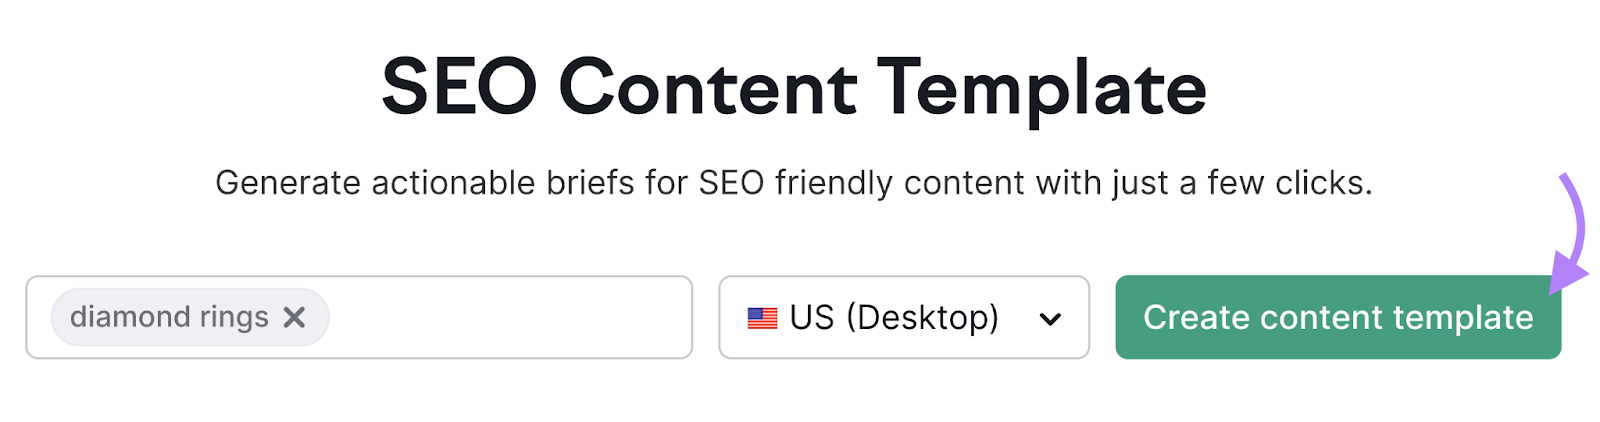 "diamond rings" in the search bar for the SEO Content Template. "US (Desktop)" is selected.